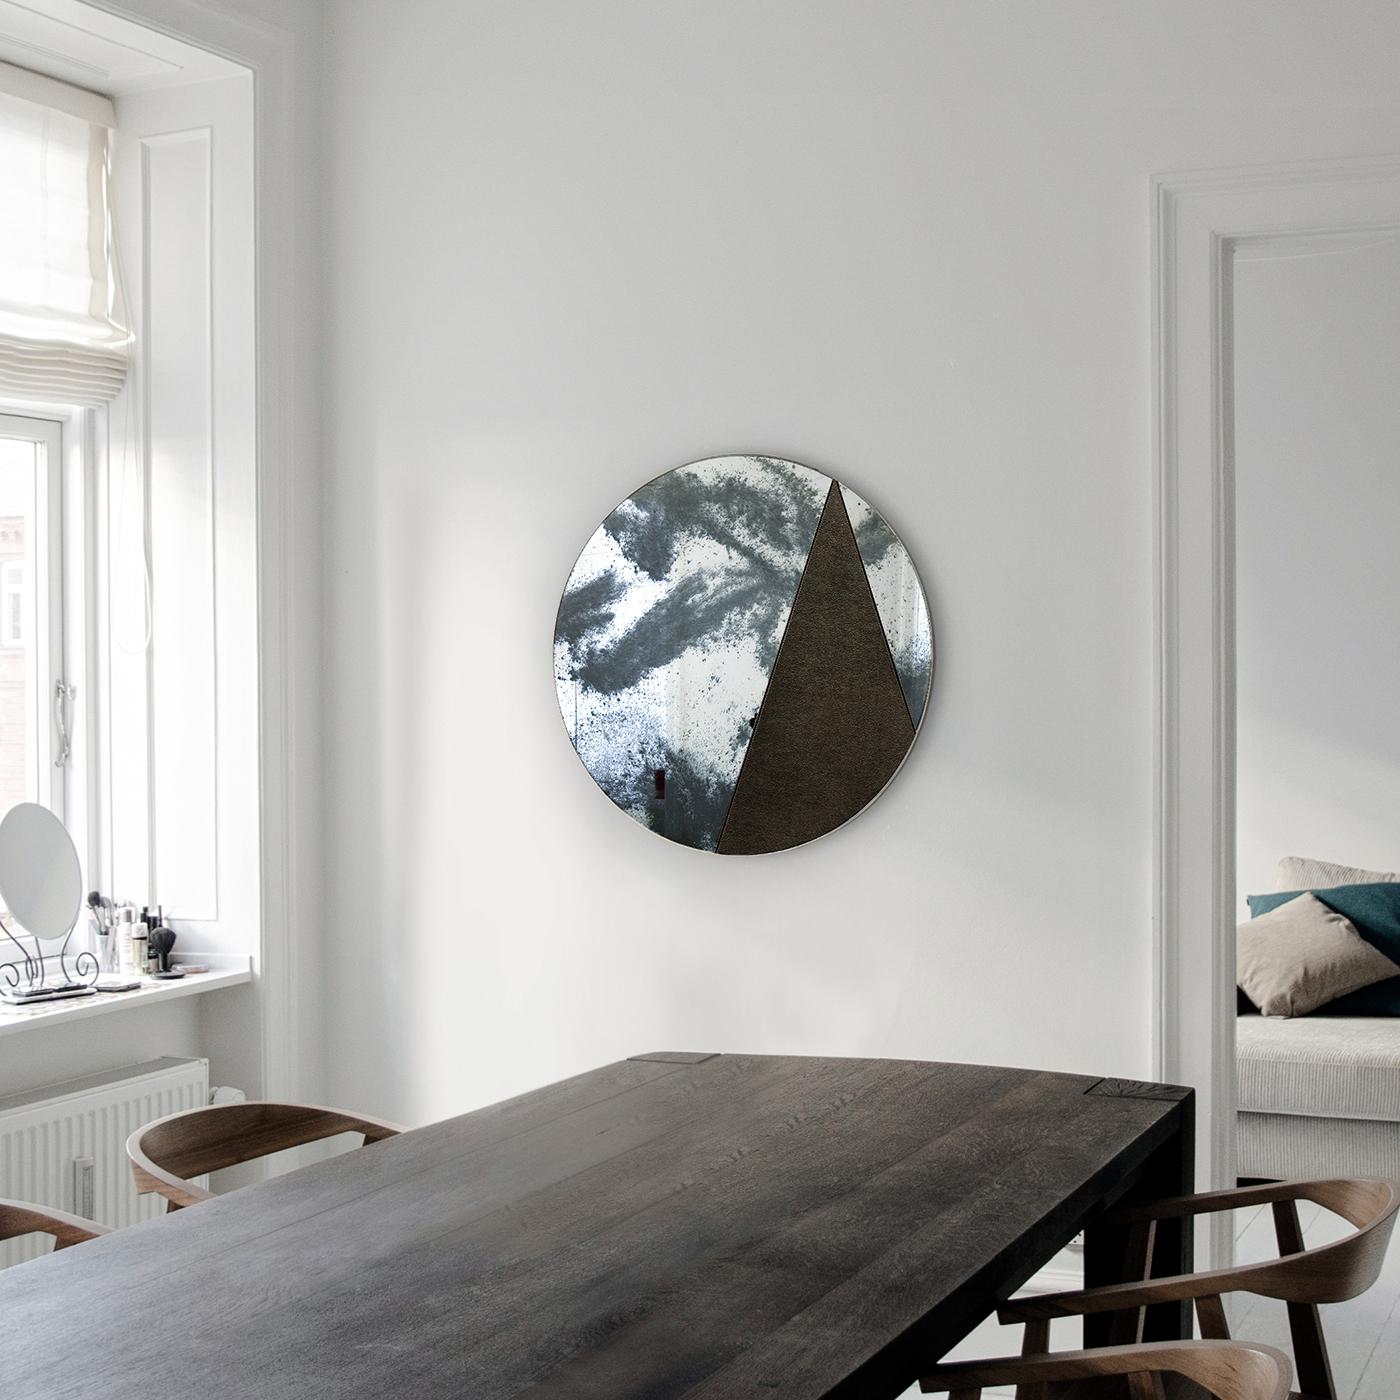 Combining stunning mirrors with the warmth of natural leather, the Itinera Res Lunar Mirror is an elegant addition to any space. The harmonious design meets with an explosion of impressive colors and patterns, resulting in a unique piece that will